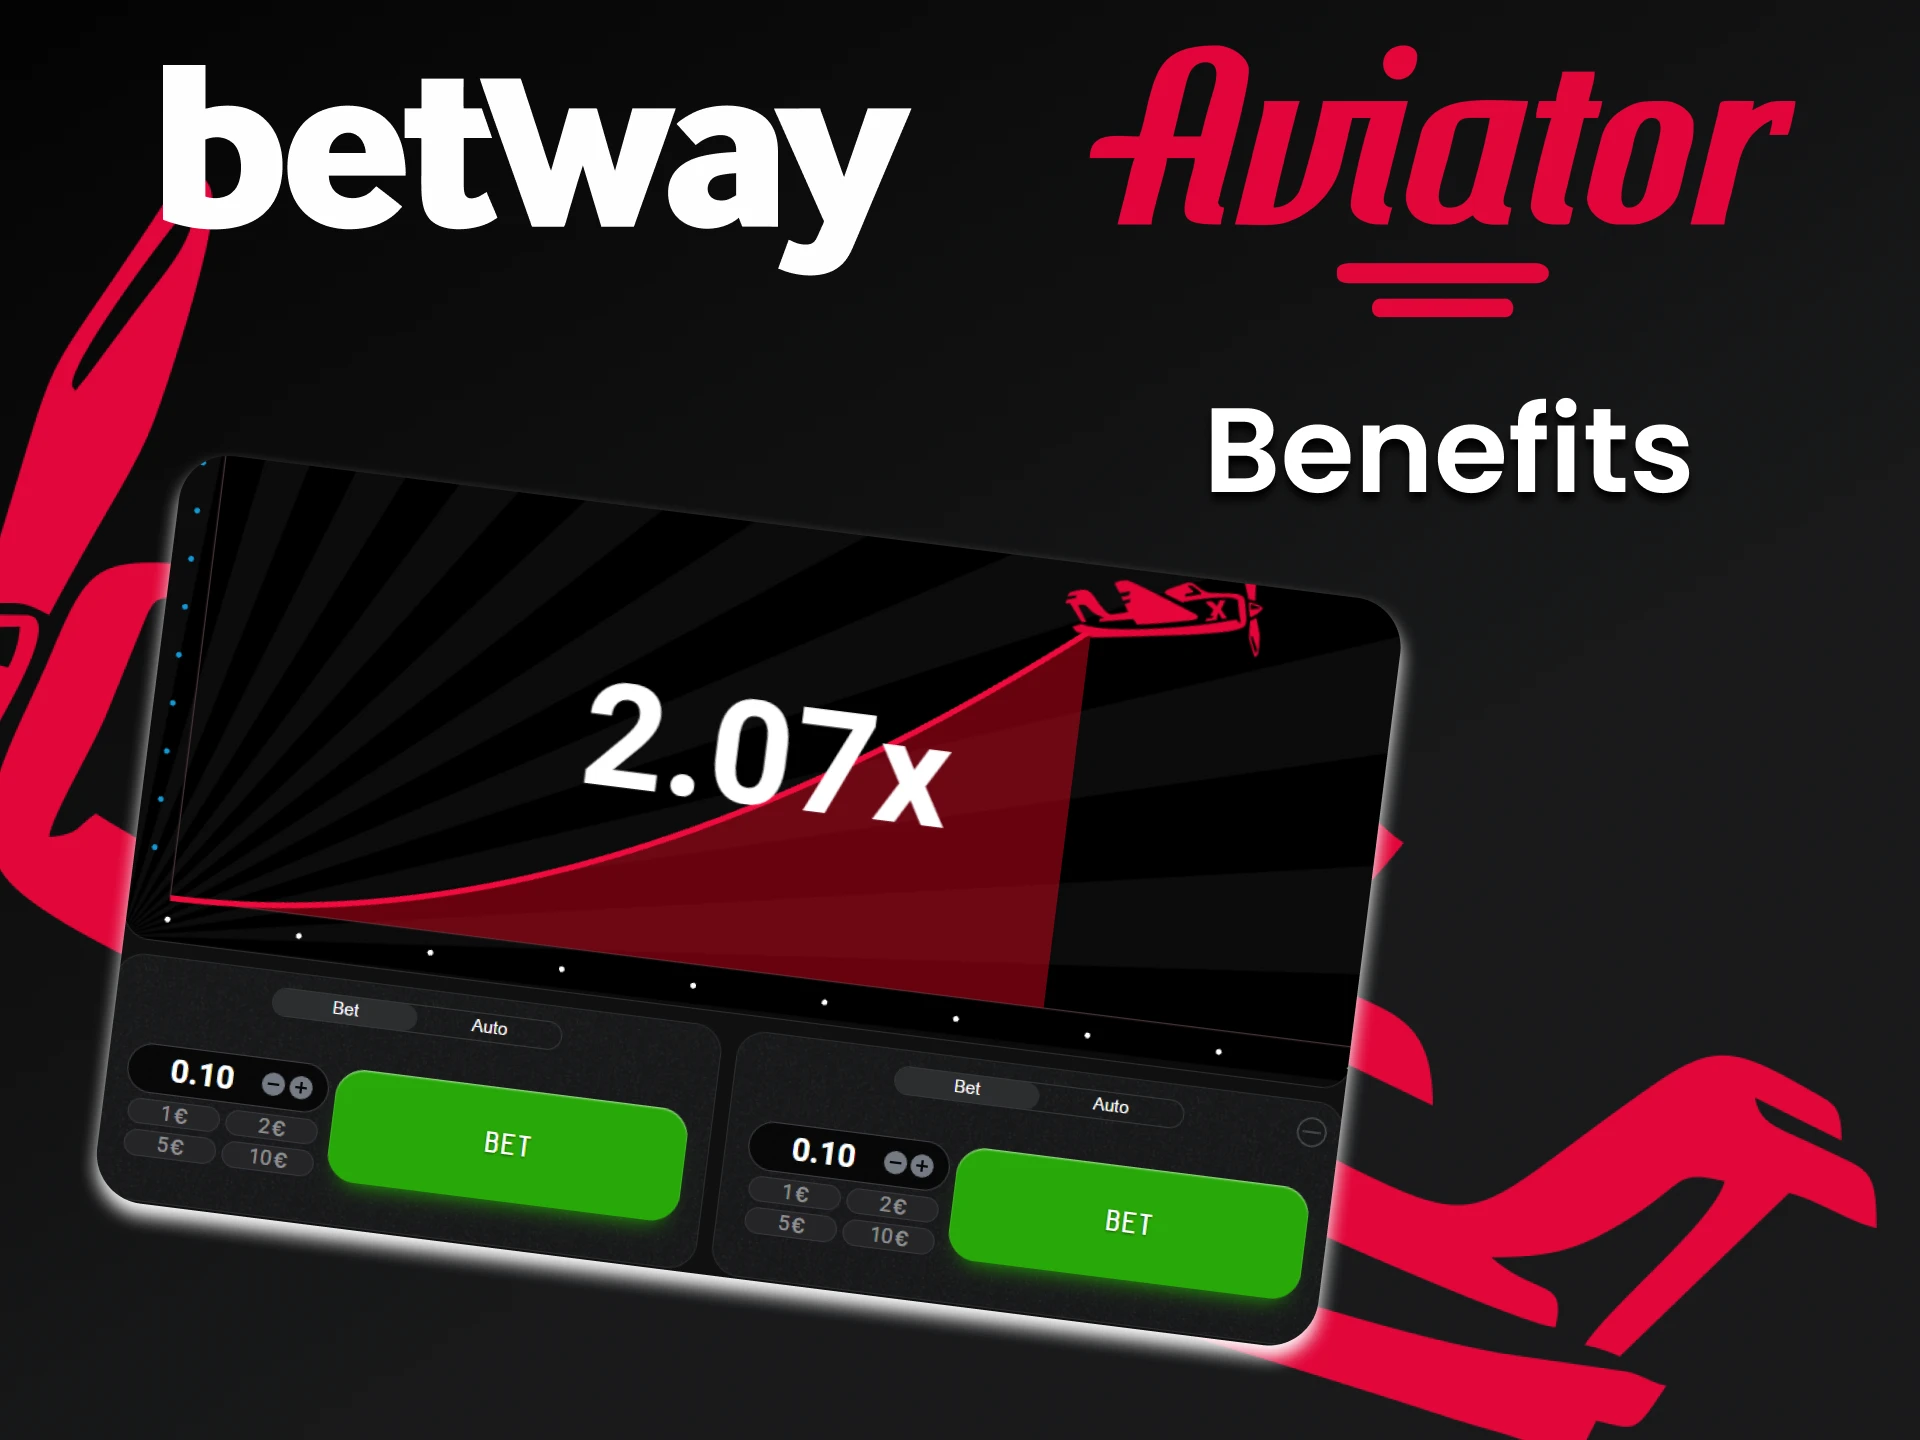 Betway has ideal conditions for playing Aviator.